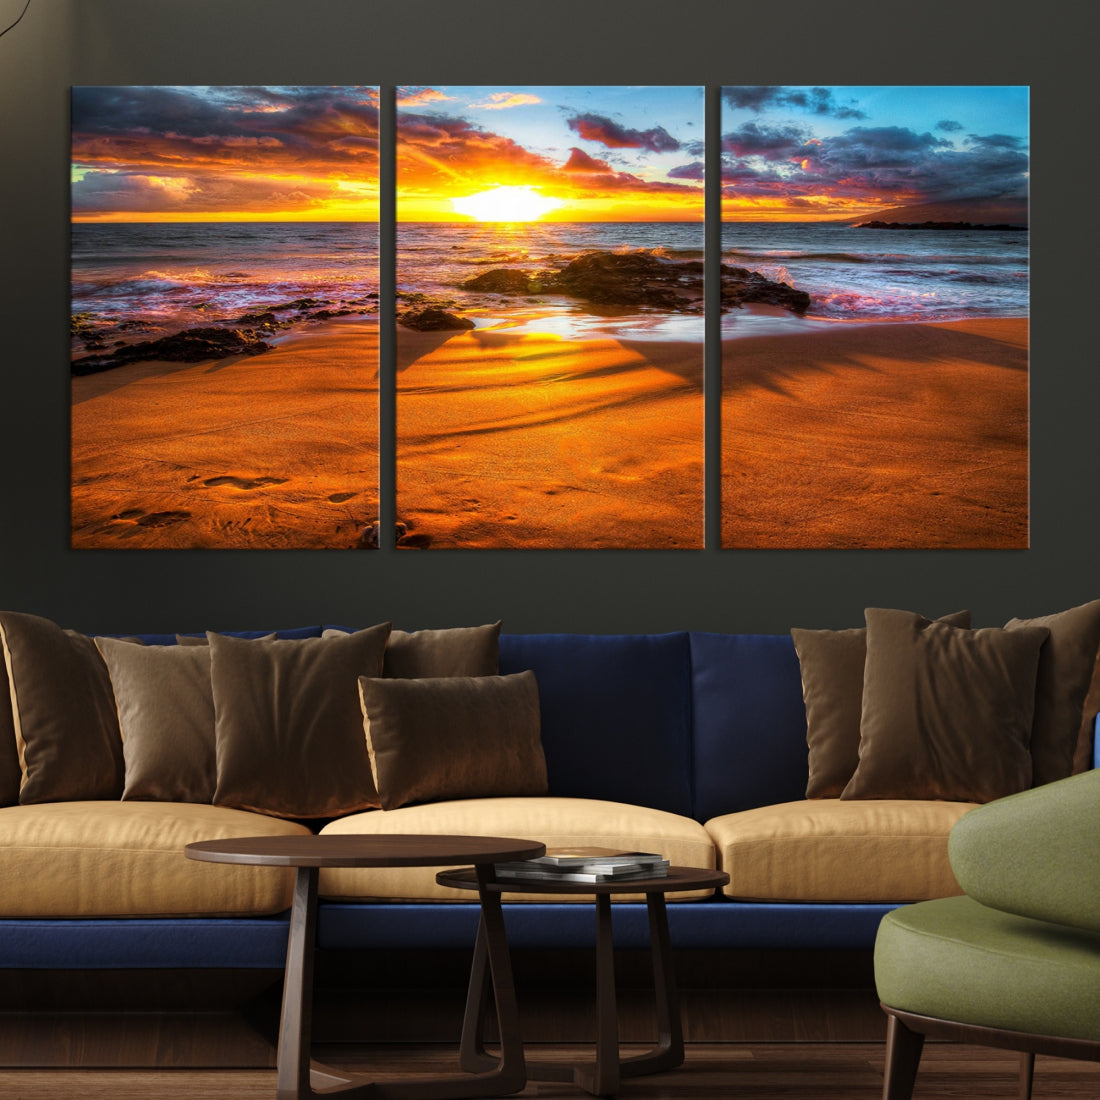 Thrilling Ocean Sunset from Beach Large Canvas Art Print for Wall Decor